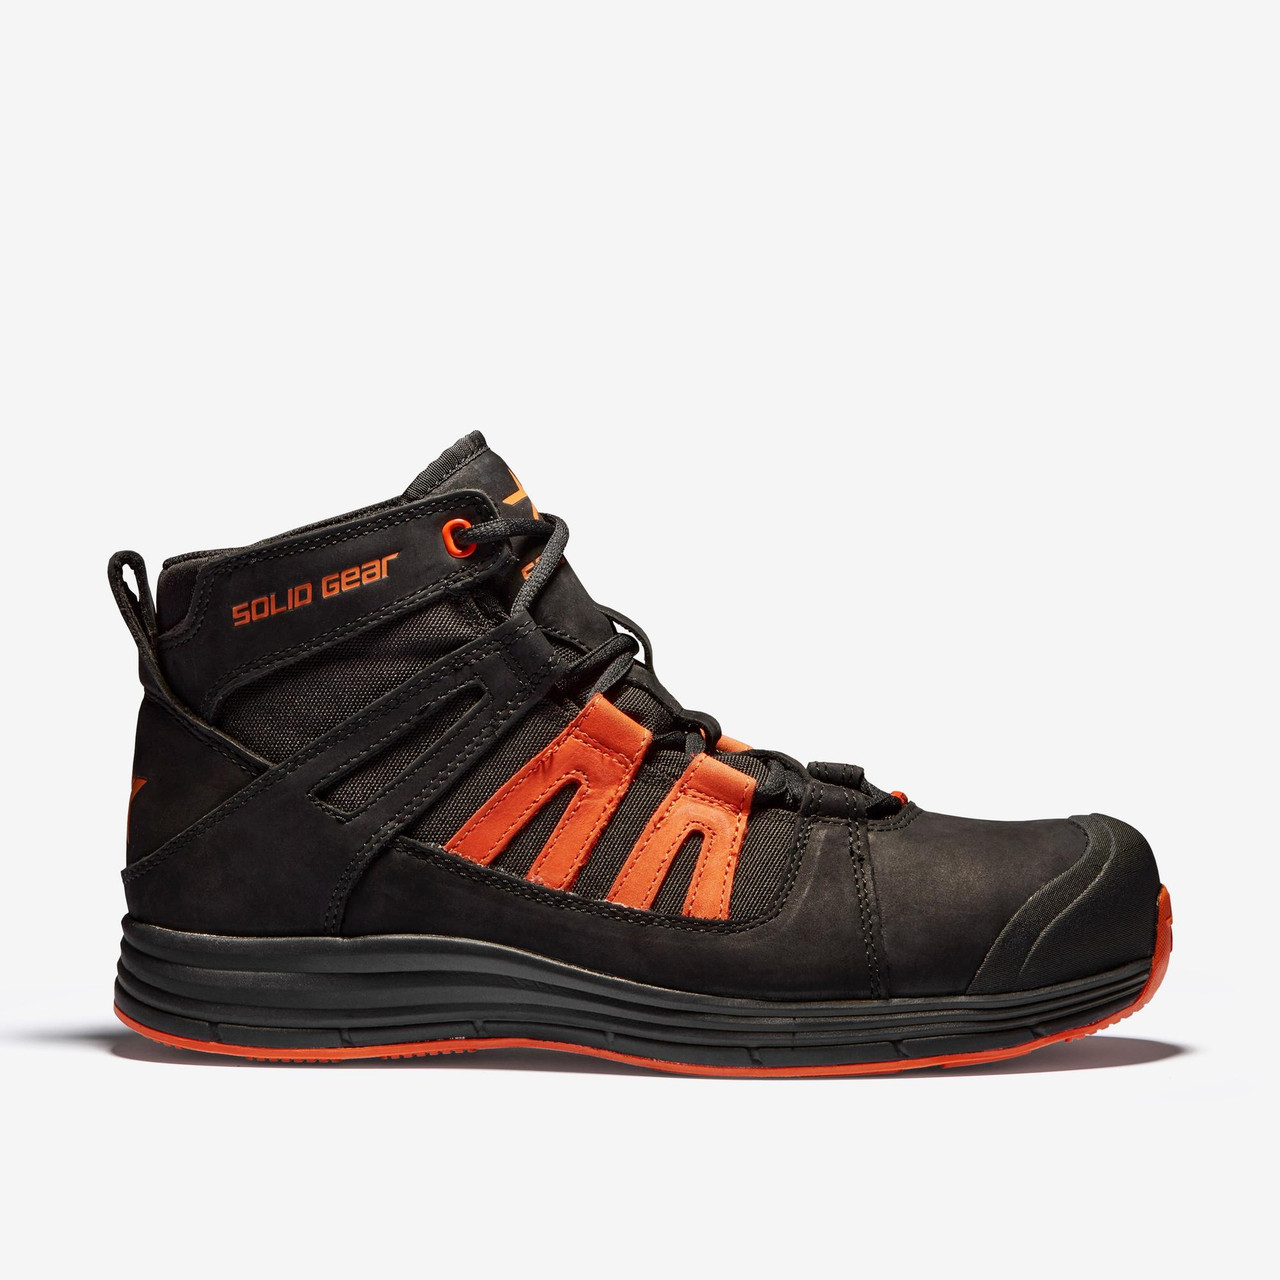 Buy online in Australia and New Zealand a SOLID GEAR NANO Toe Cap Safety Boots for Electricians that perform exceptionally for Aviation Industry